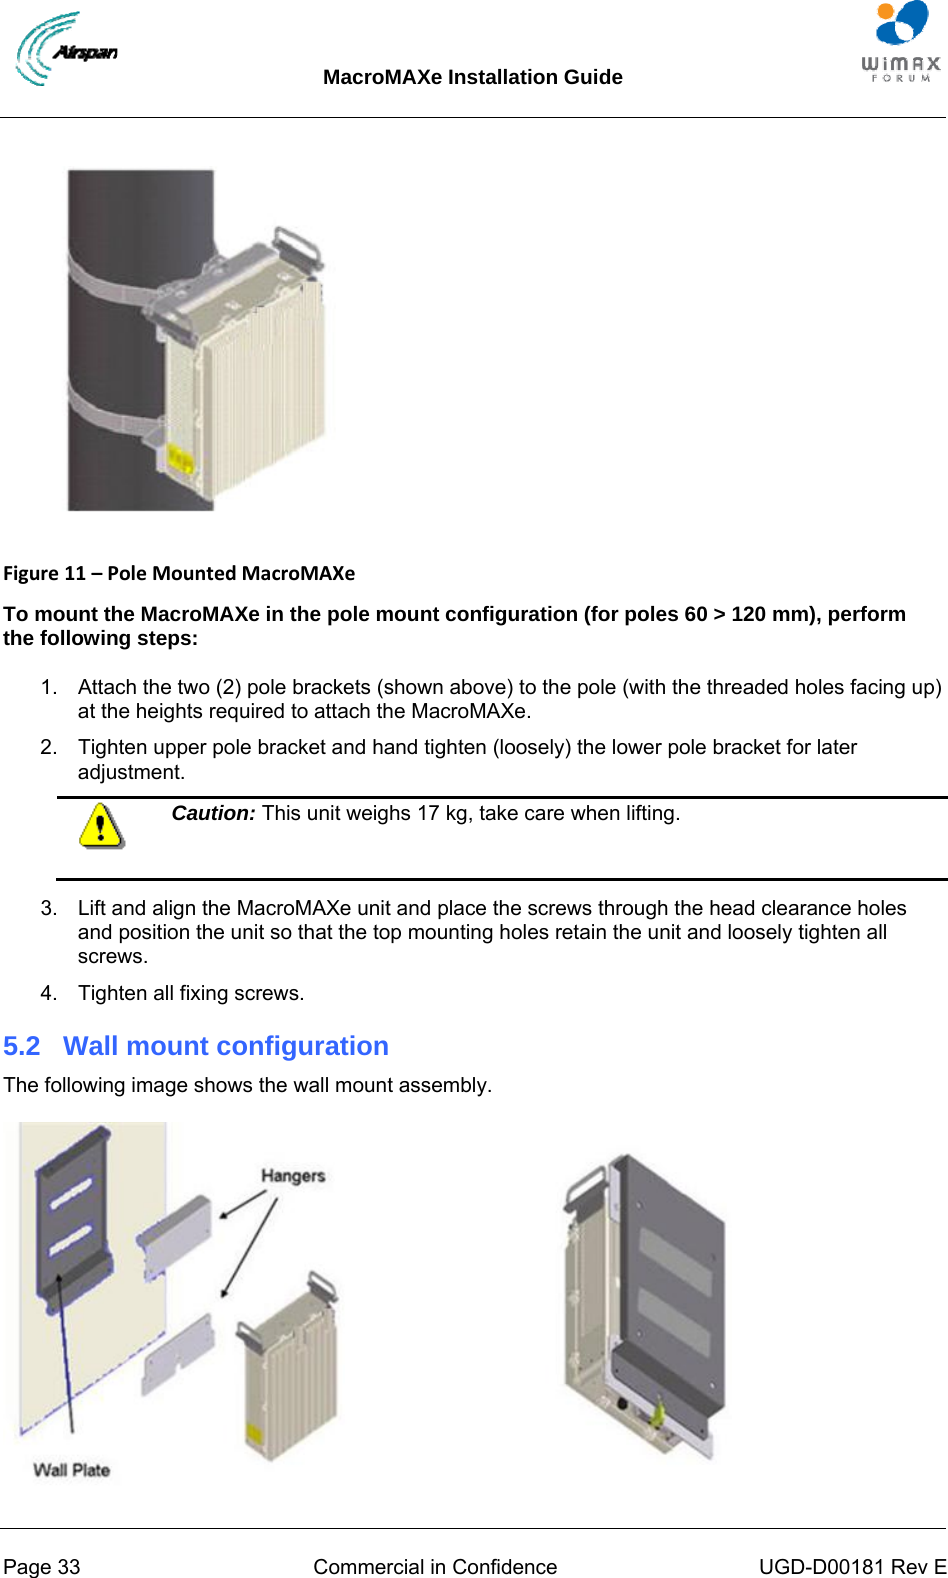 MacroMAXe Installation Guide  Page 33  Commercial in Confidence  UGD-D00181 Rev E   Figure11–PoleMountedMacroMAXe To mount the MacroMAXe in the pole mount configuration (for poles 60 &gt; 120 mm), perform the following steps: 1.  Attach the two (2) pole brackets (shown above) to the pole (with the threaded holes facing up) at the heights required to attach the MacroMAXe. 2.  Tighten upper pole bracket and hand tighten (loosely) the lower pole bracket for later adjustment.  Caution: This unit weighs 17 kg, take care when lifting.  3.  Lift and align the MacroMAXe unit and place the screws through the head clearance holes and position the unit so that the top mounting holes retain the unit and loosely tighten all screws. 4.  Tighten all fixing screws. 5.2  Wall mount configuration The following image shows the wall mount assembly.  